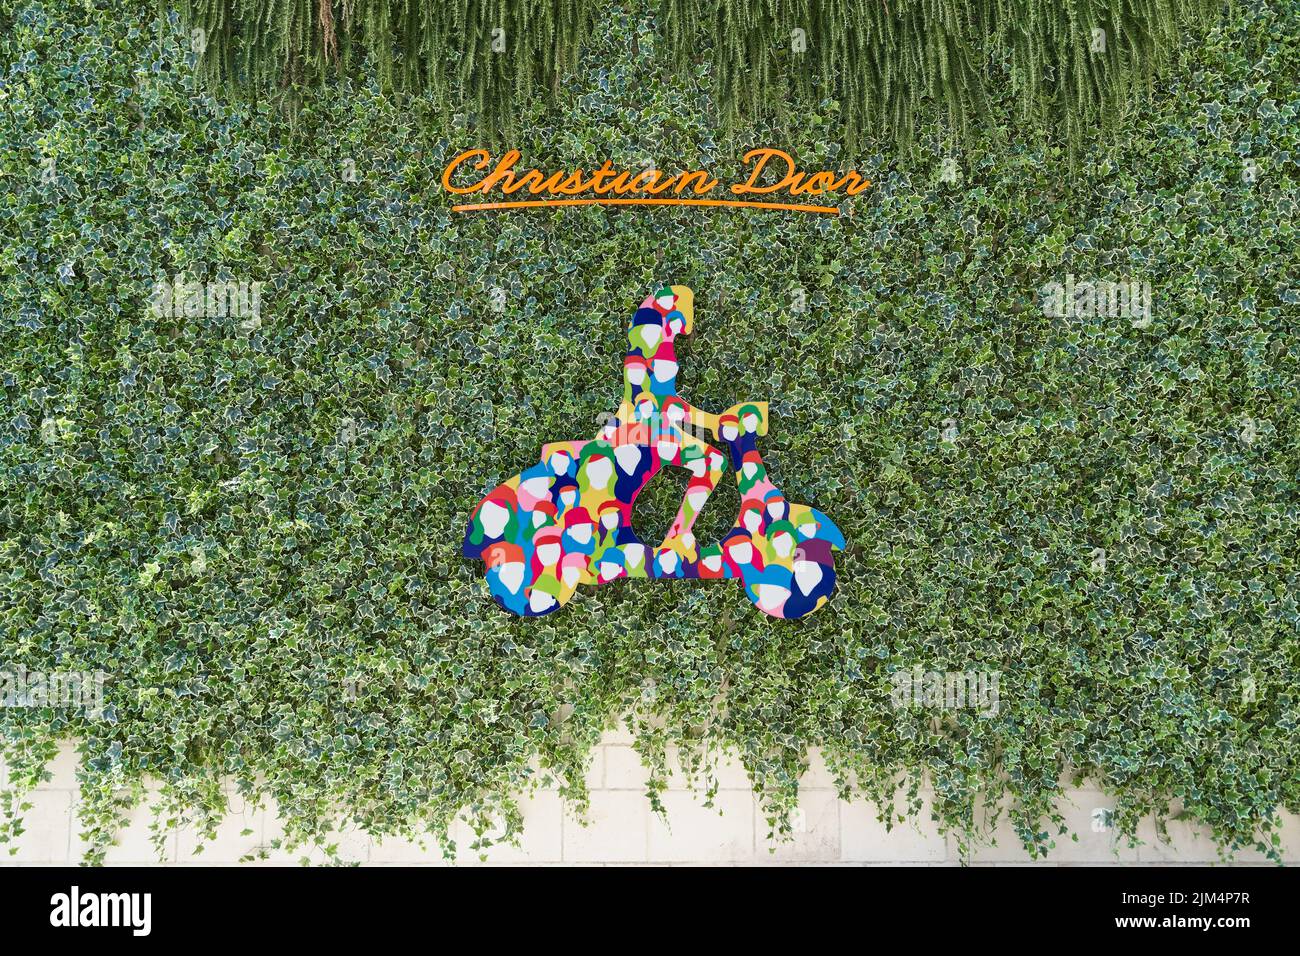 Christian Dior brand sign on a wall overgrown with ivy Stock Photo